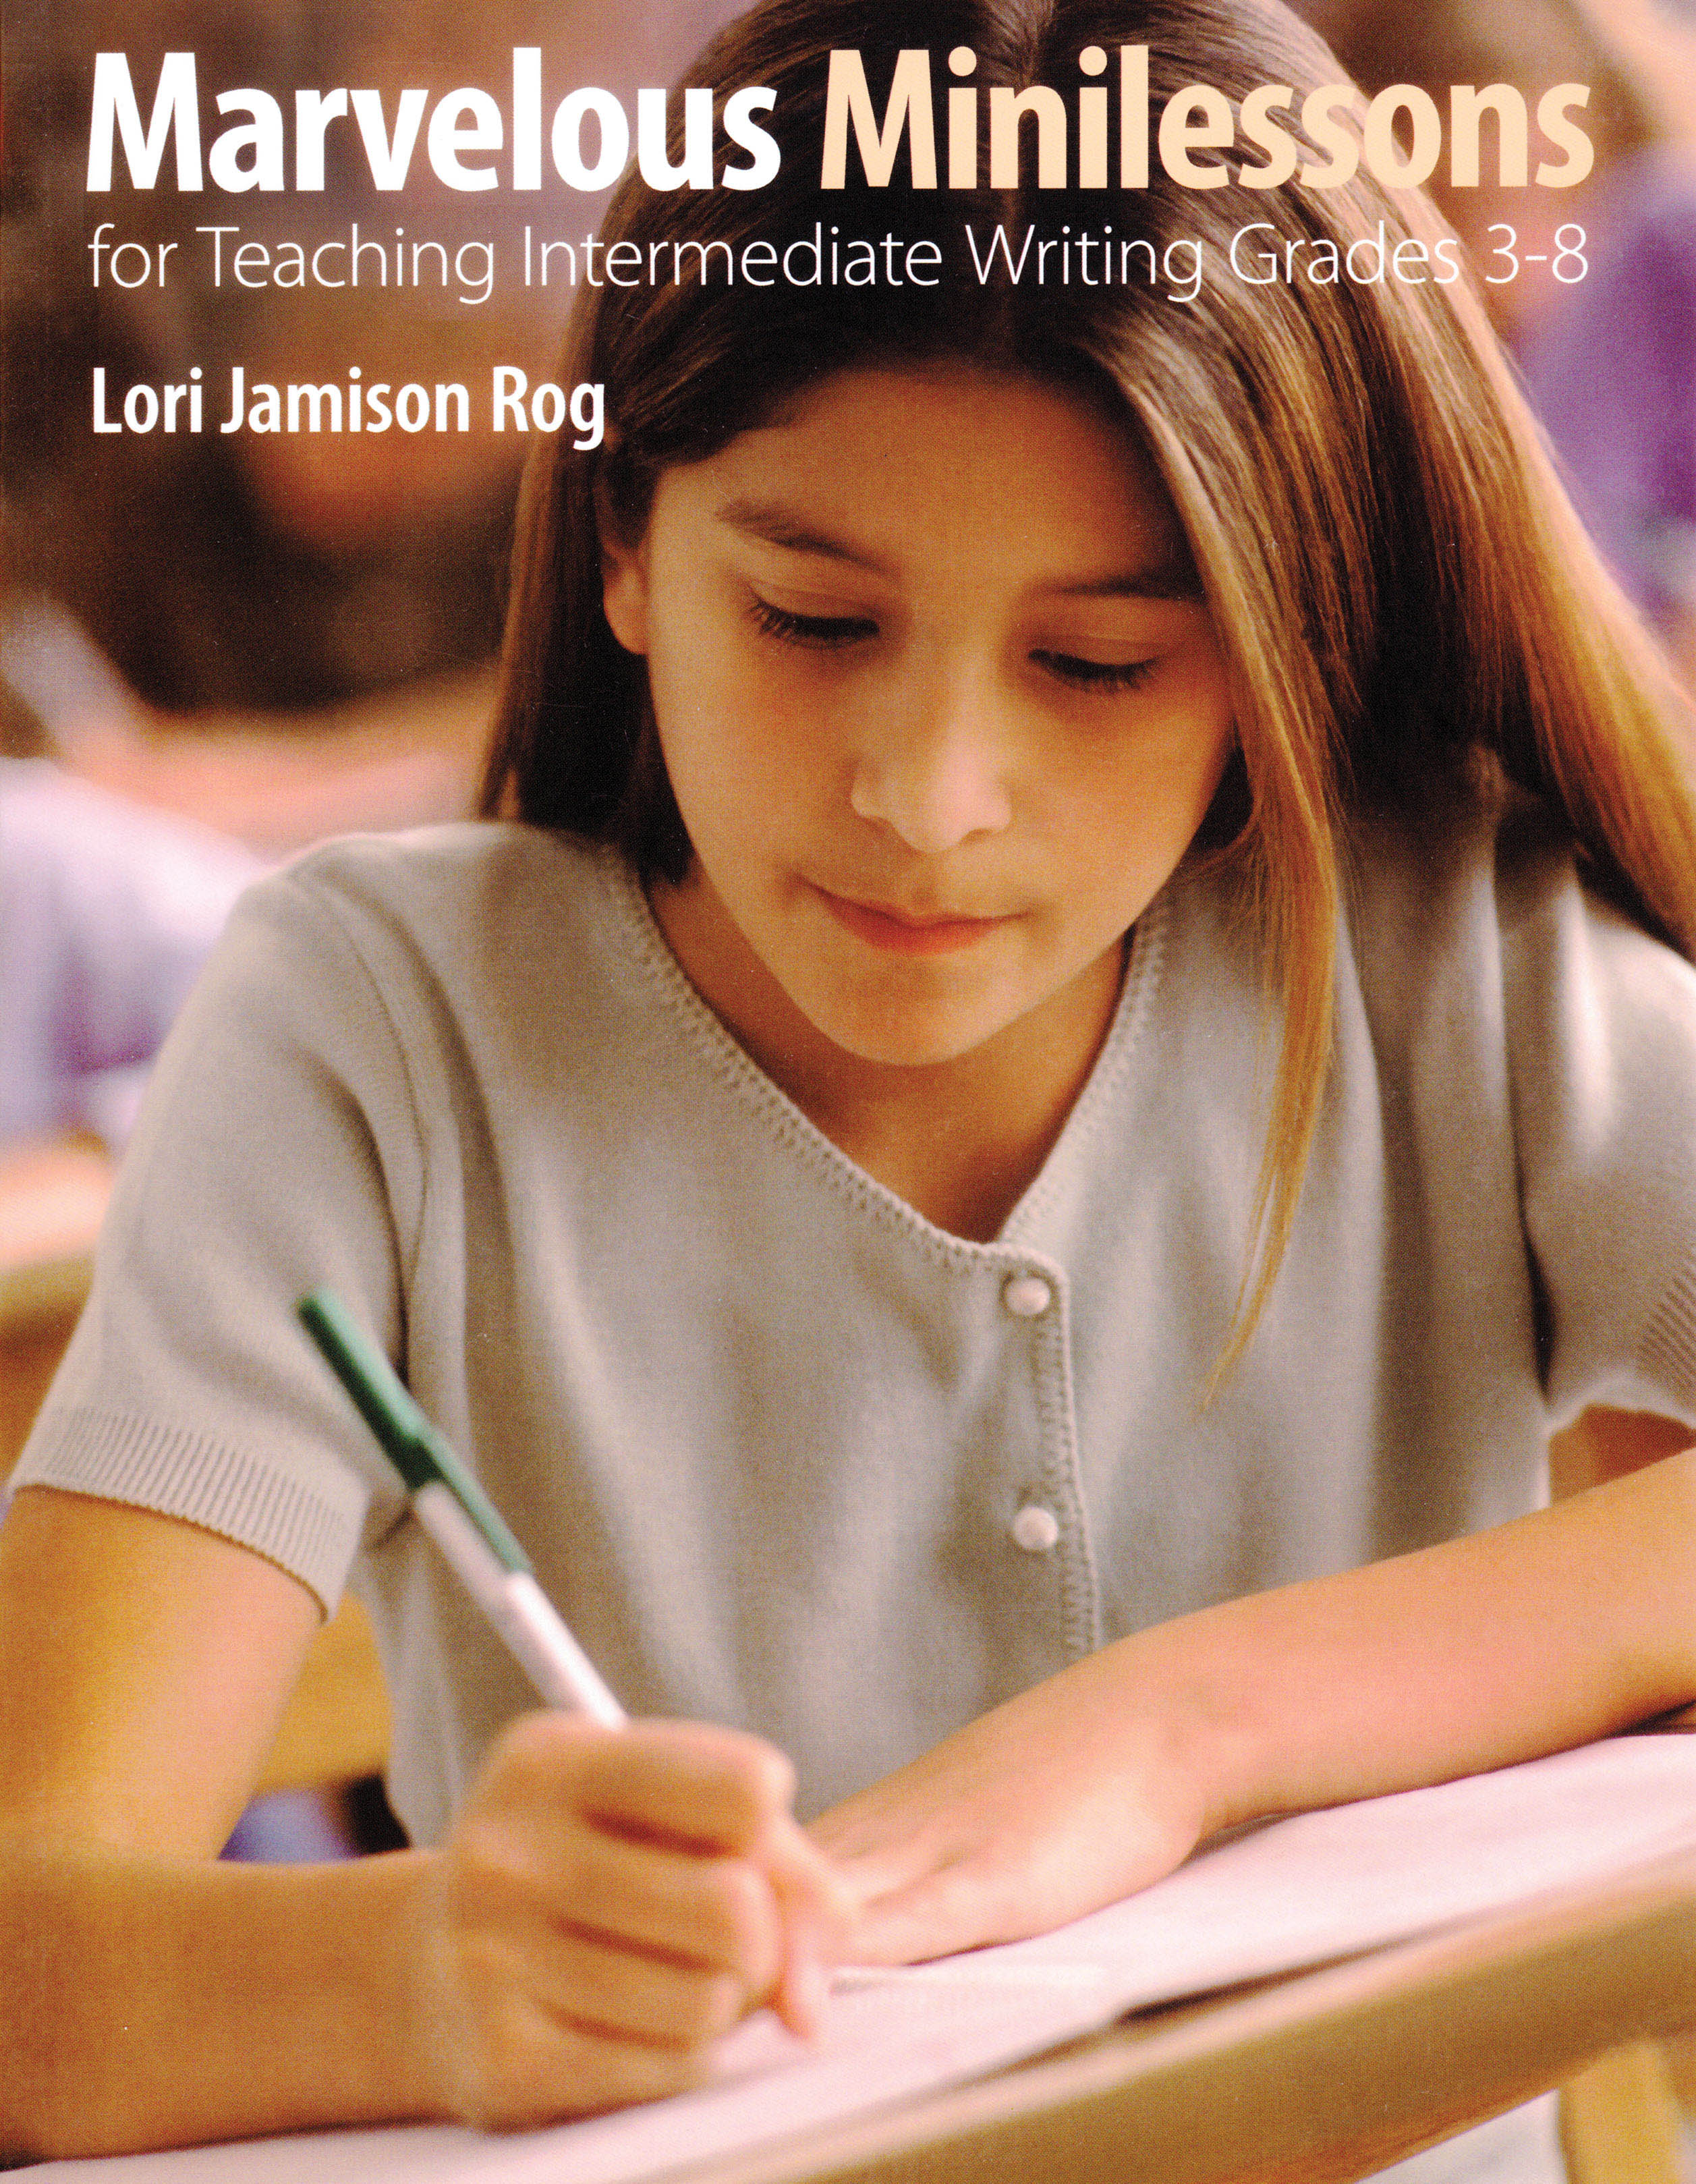 Book cover of ‘Marvelous Minilessons for Teaching Intermediate Writing Grades 3–8’.